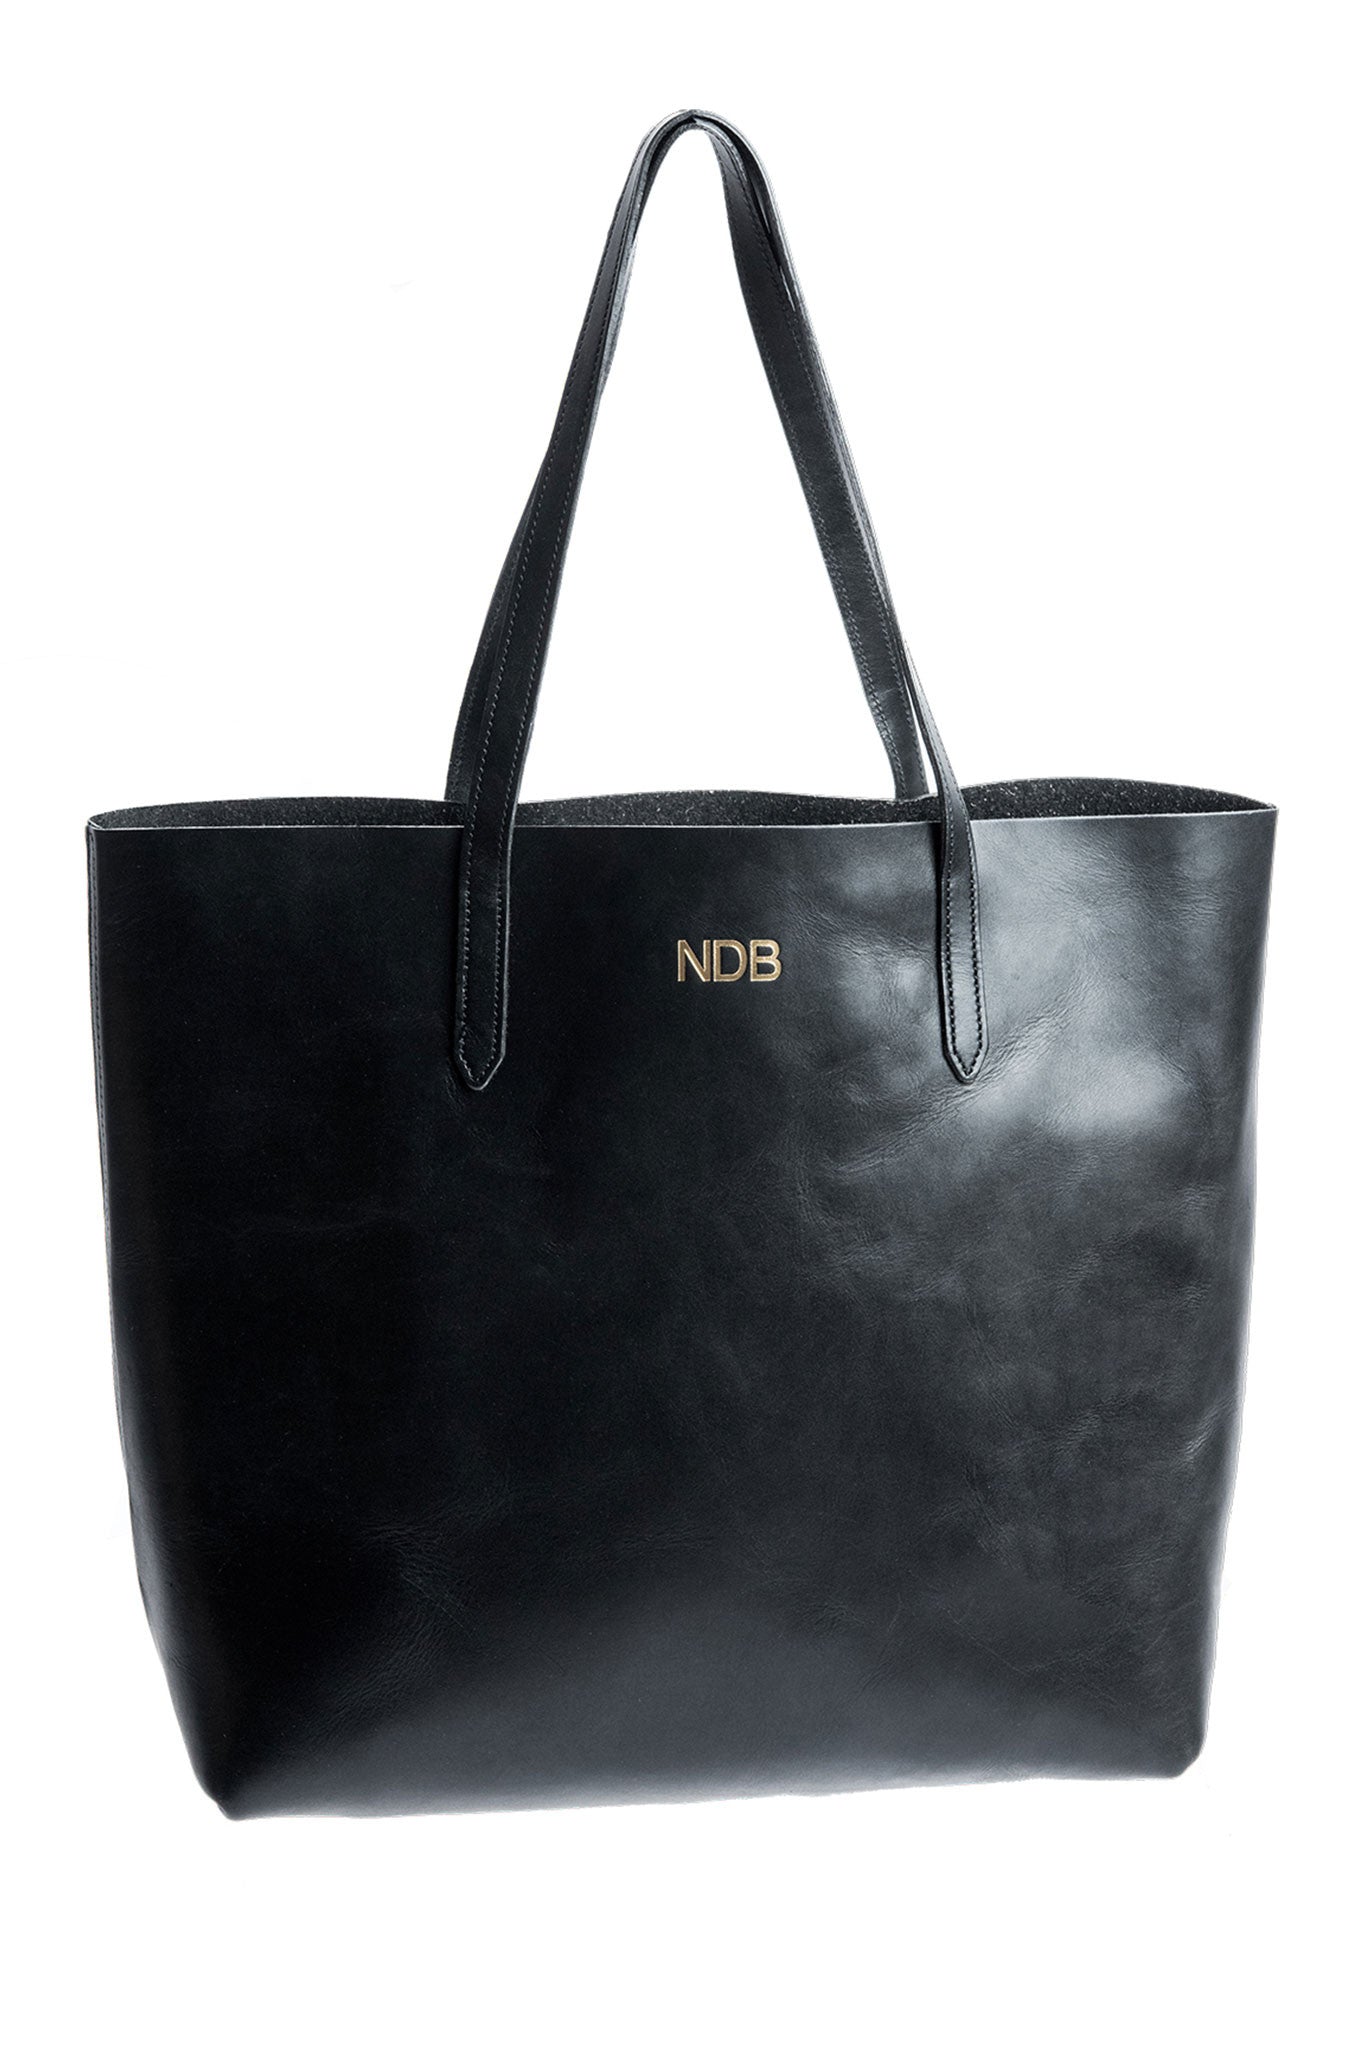 FOTO | The Highland Leather Tote - Black - a genuine leather tote in black vegetable tanned leather can be personalized with gold foil initials, making it the perfect personalized gift.